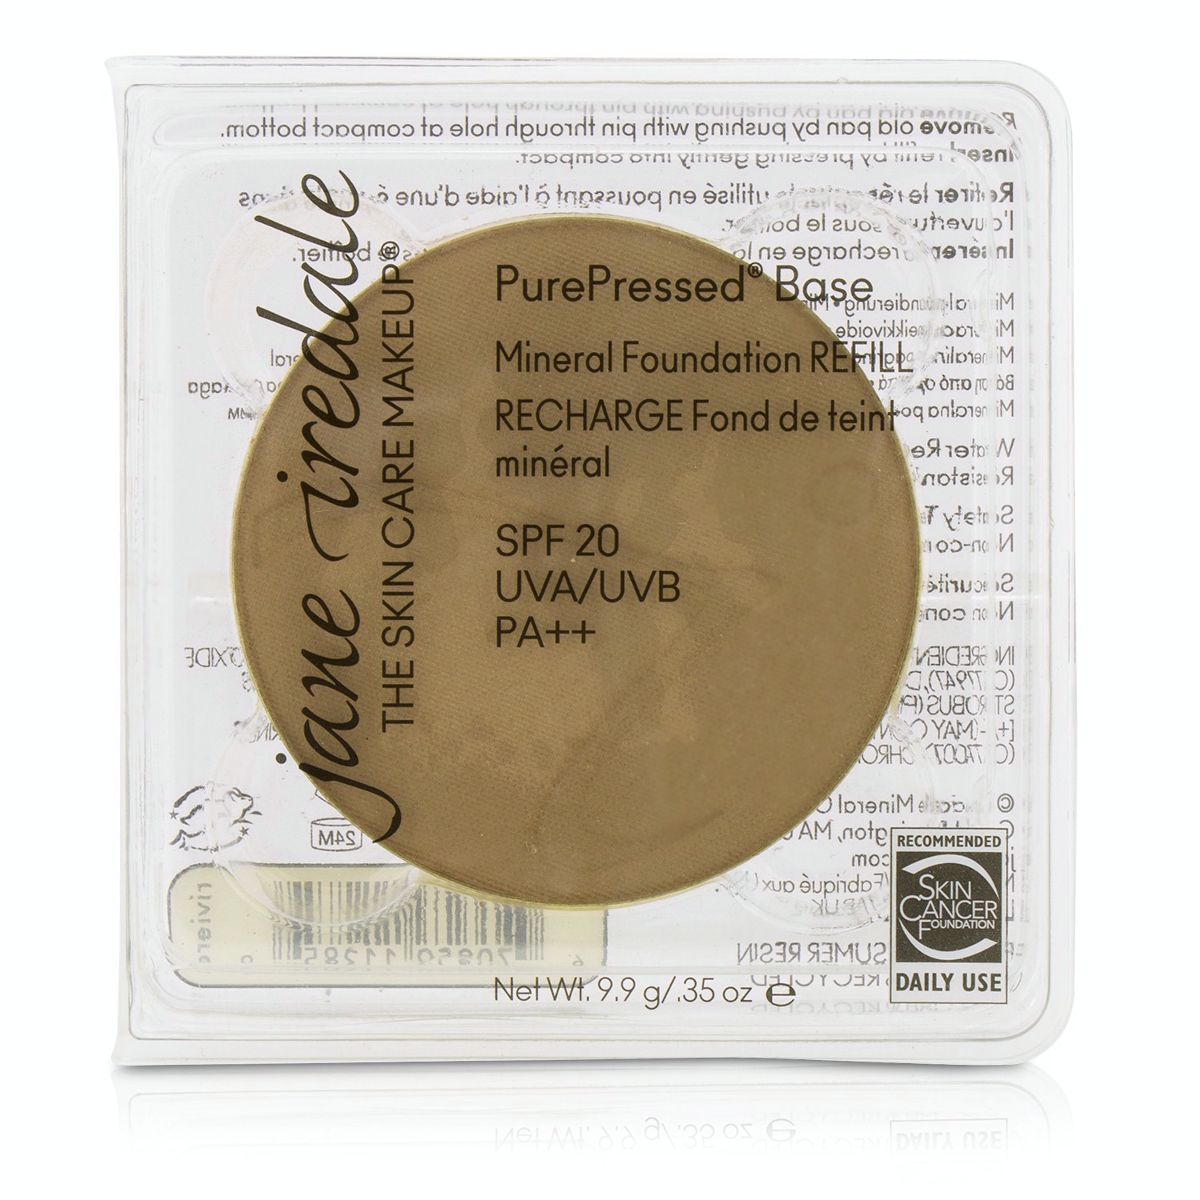 PurePressed Base Mineral Foundation Refill SPF 20 - Riviera Jane Iredale Image